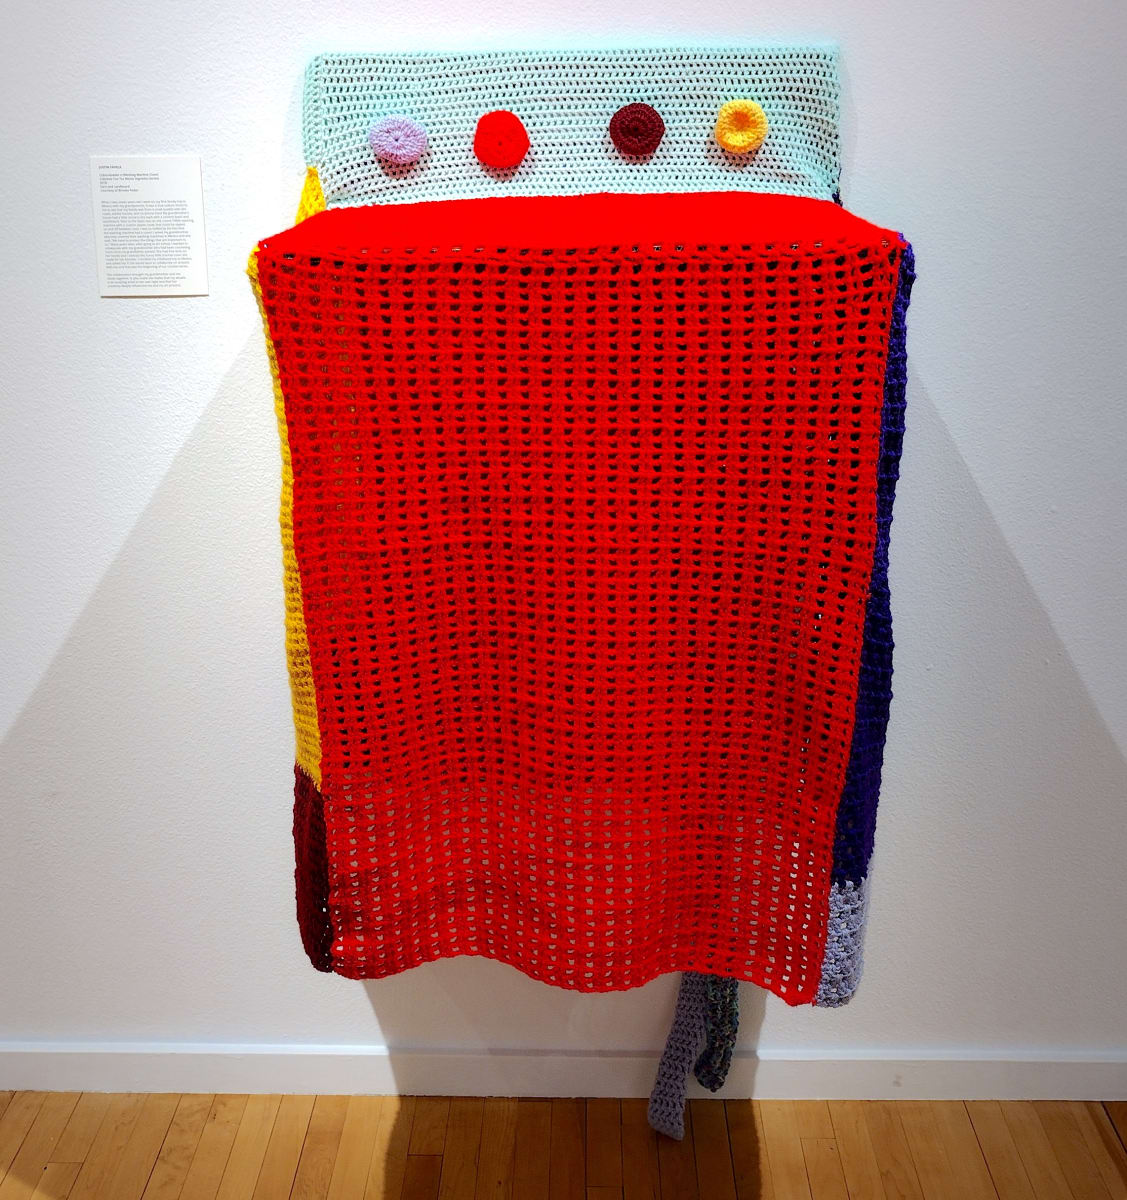 "Cubre-lavador a (Washing Machine Cover)" Cubreme Con Tus Manto Sagrados (series) by Justin Favela  Image: Justin Favela
"Cubre-lavador a (Washing Machine Cover)" Cubreme Con Tus Manto Sagrados (Series), 2018
Yarn and cardboard
Courtesy of Brooke Feder and Jesse Stuart